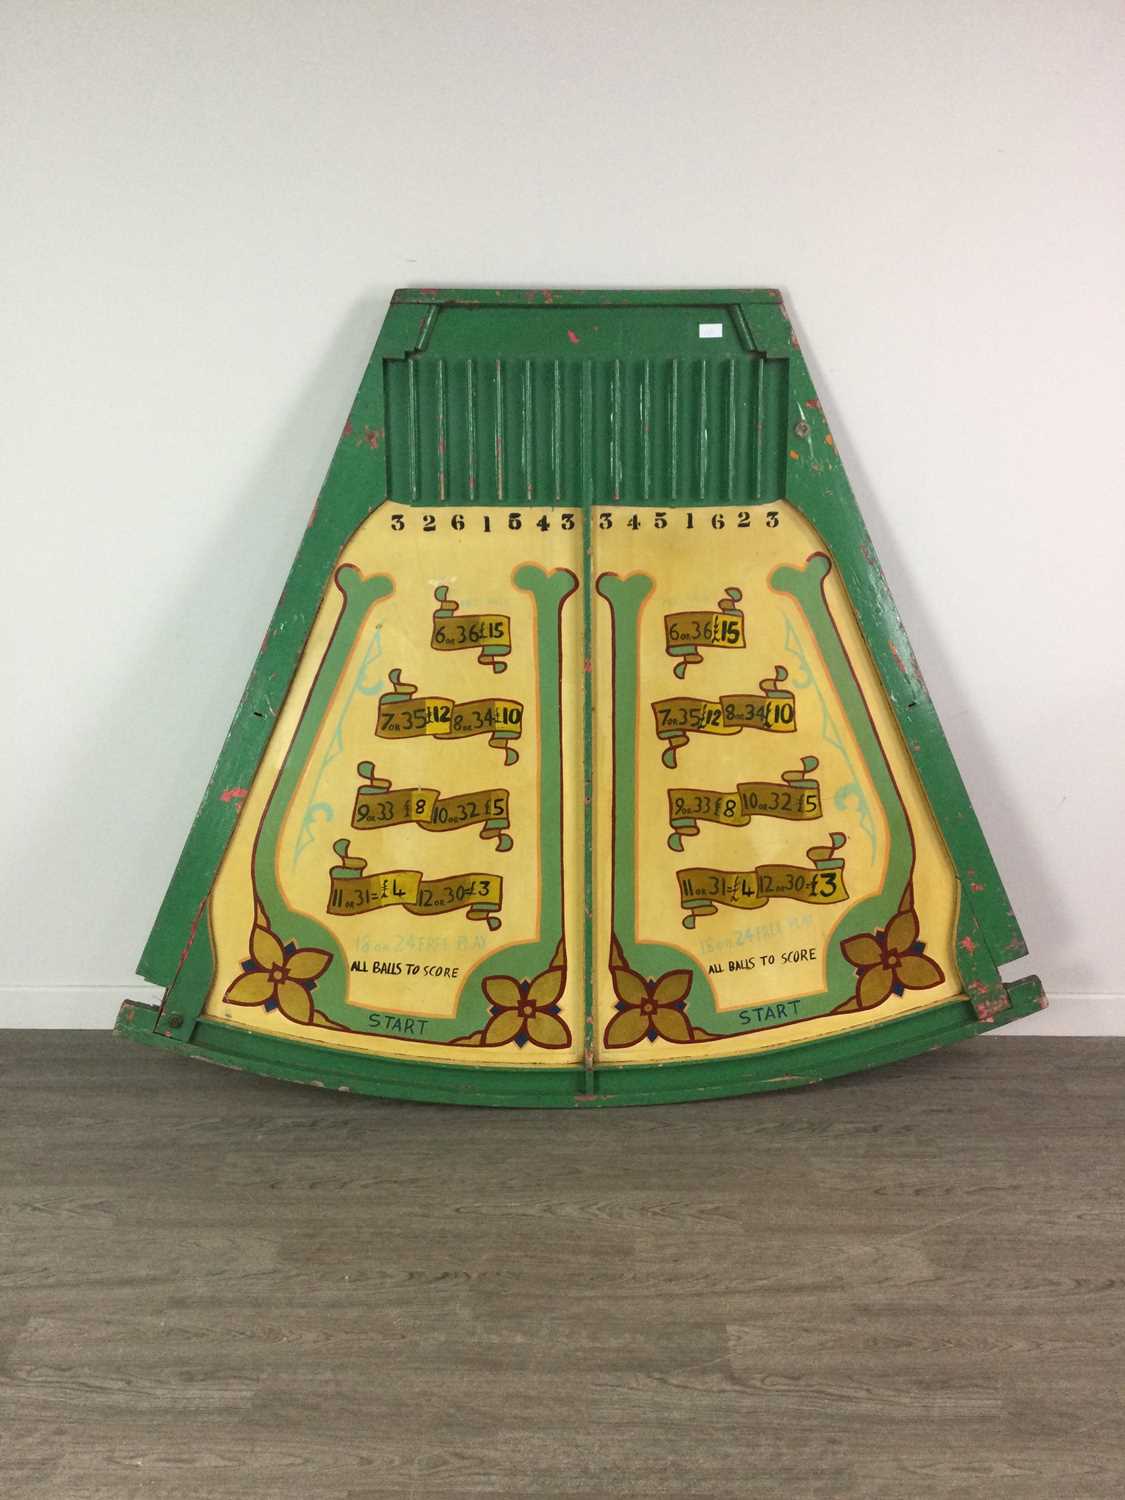 Lot 1139 - A HAND PAINTED WOOD FAIRGROUND GAMING BOARD